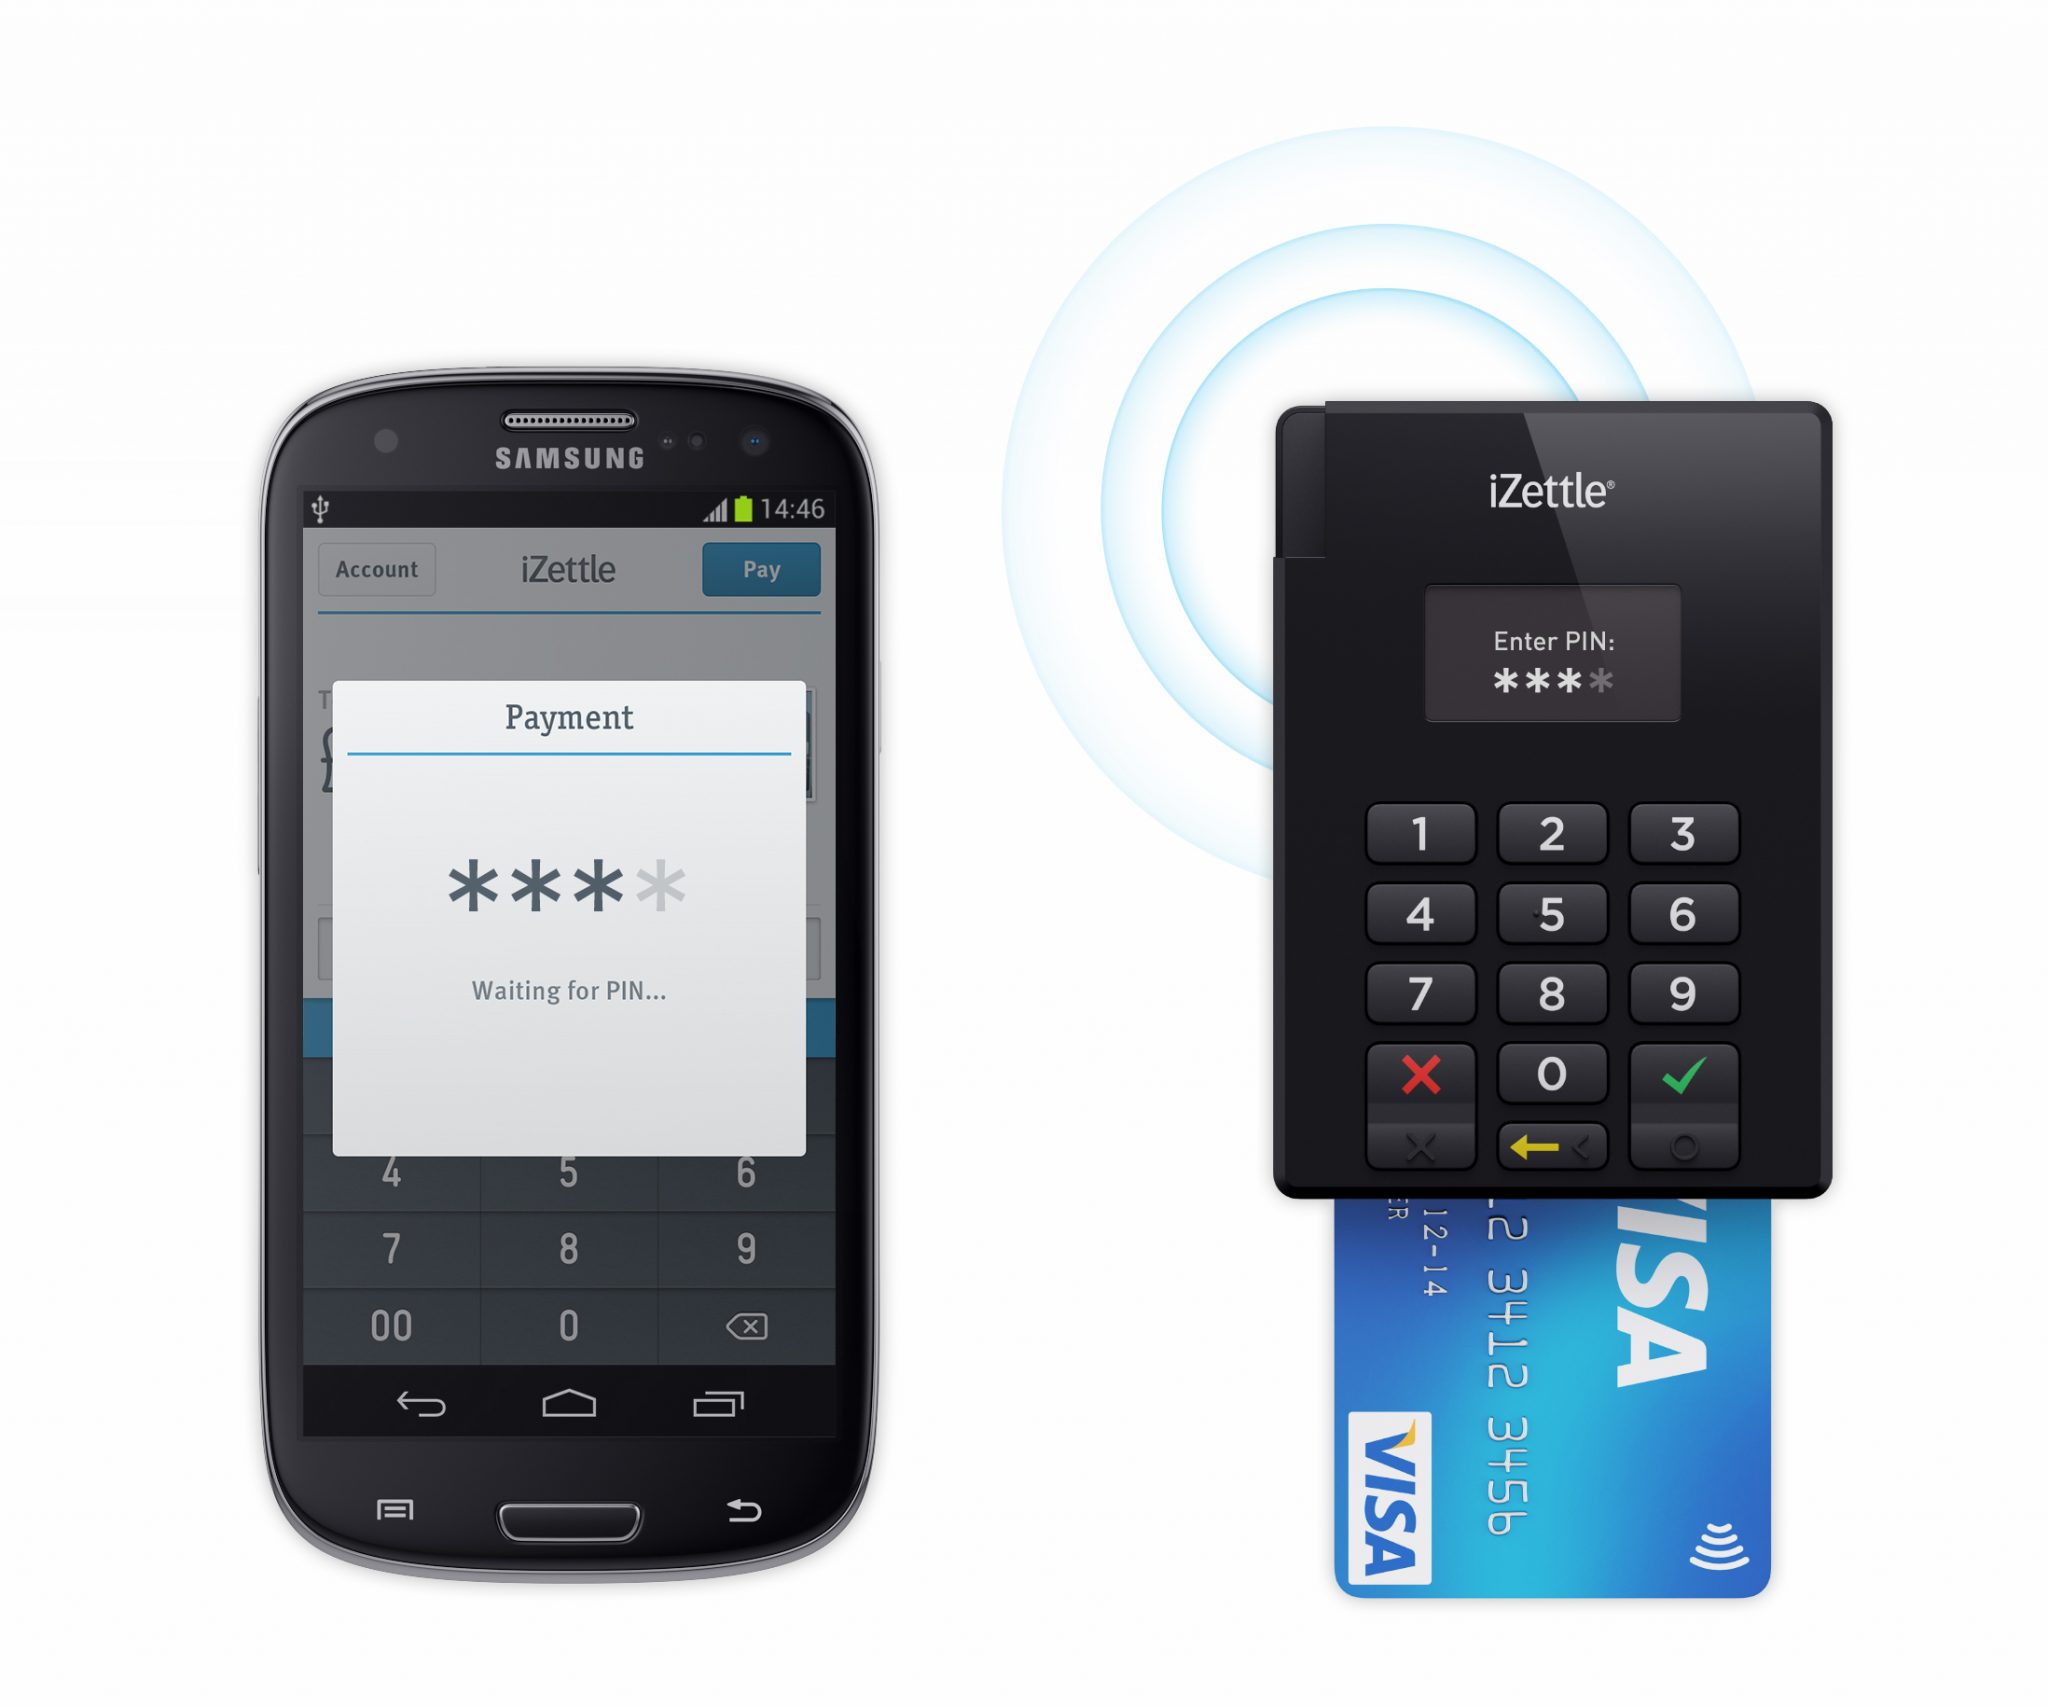 iZettle aims to make it cheaper and easier to accept card payments